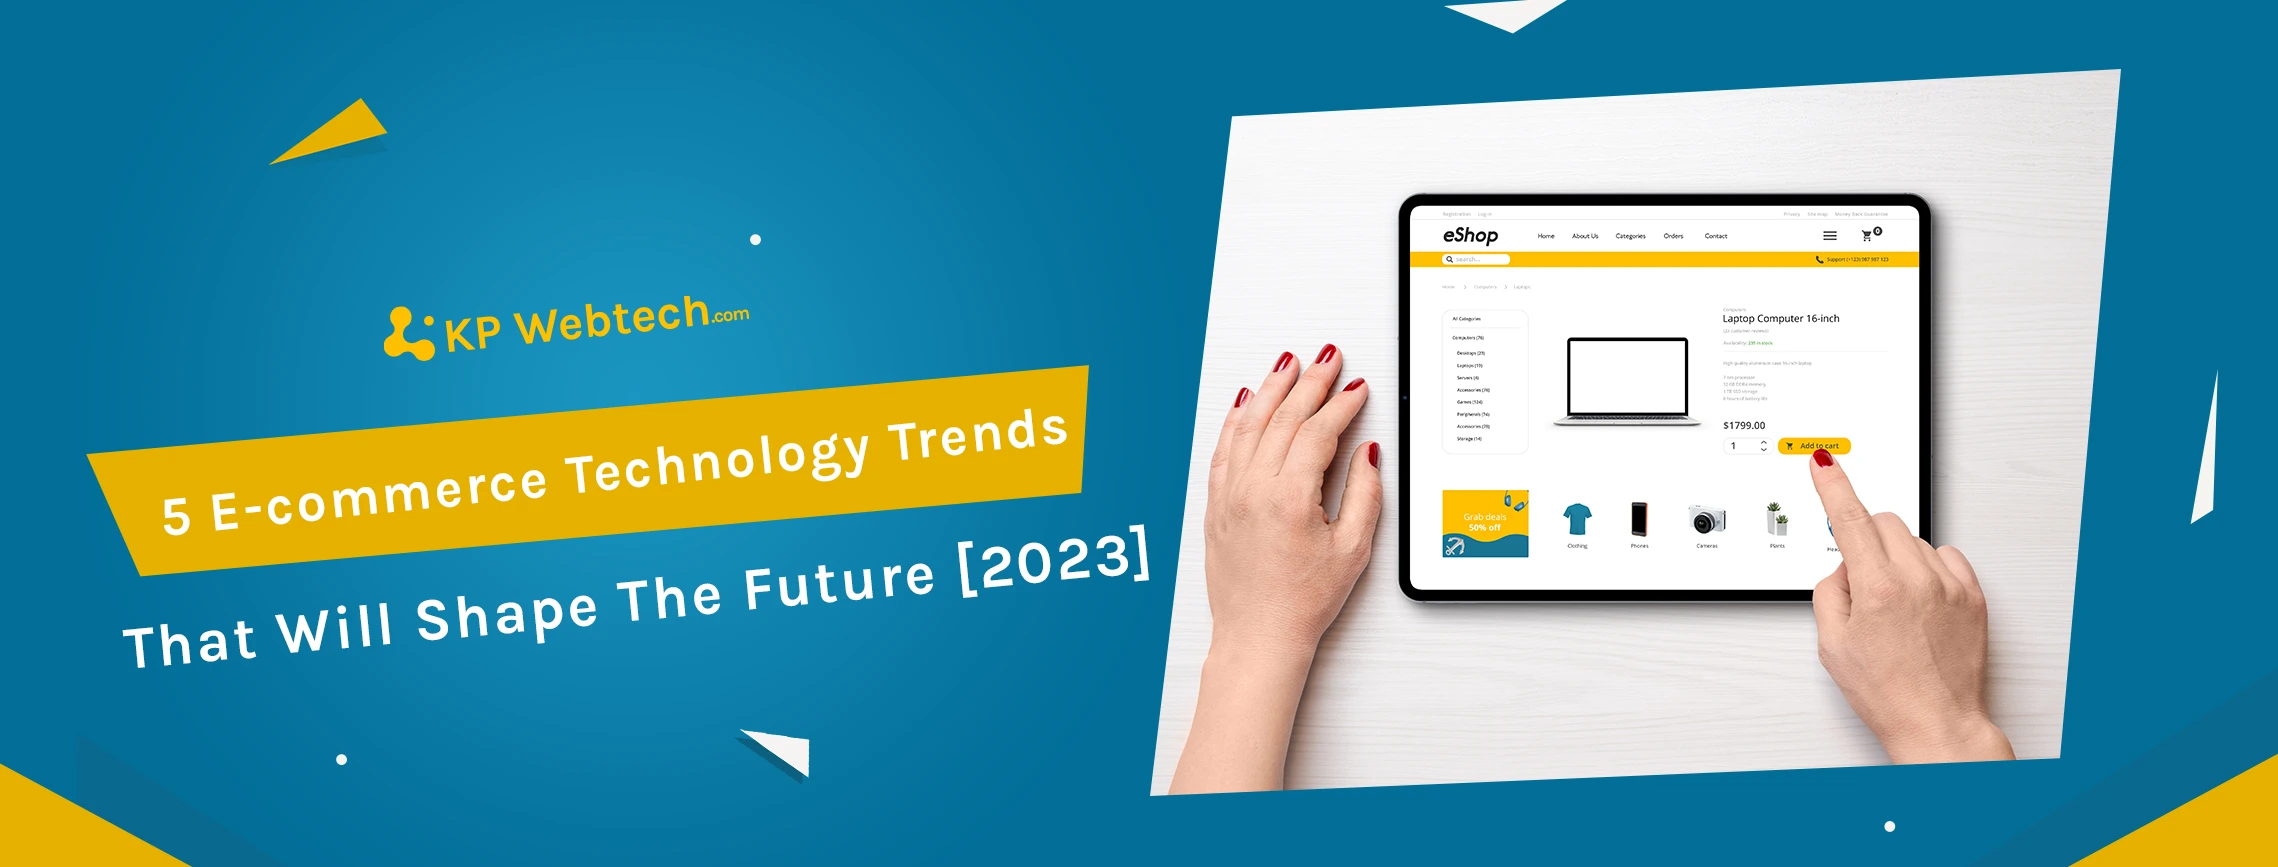 5 E-commerce Technology Trends That Will Shape The Future [2023]